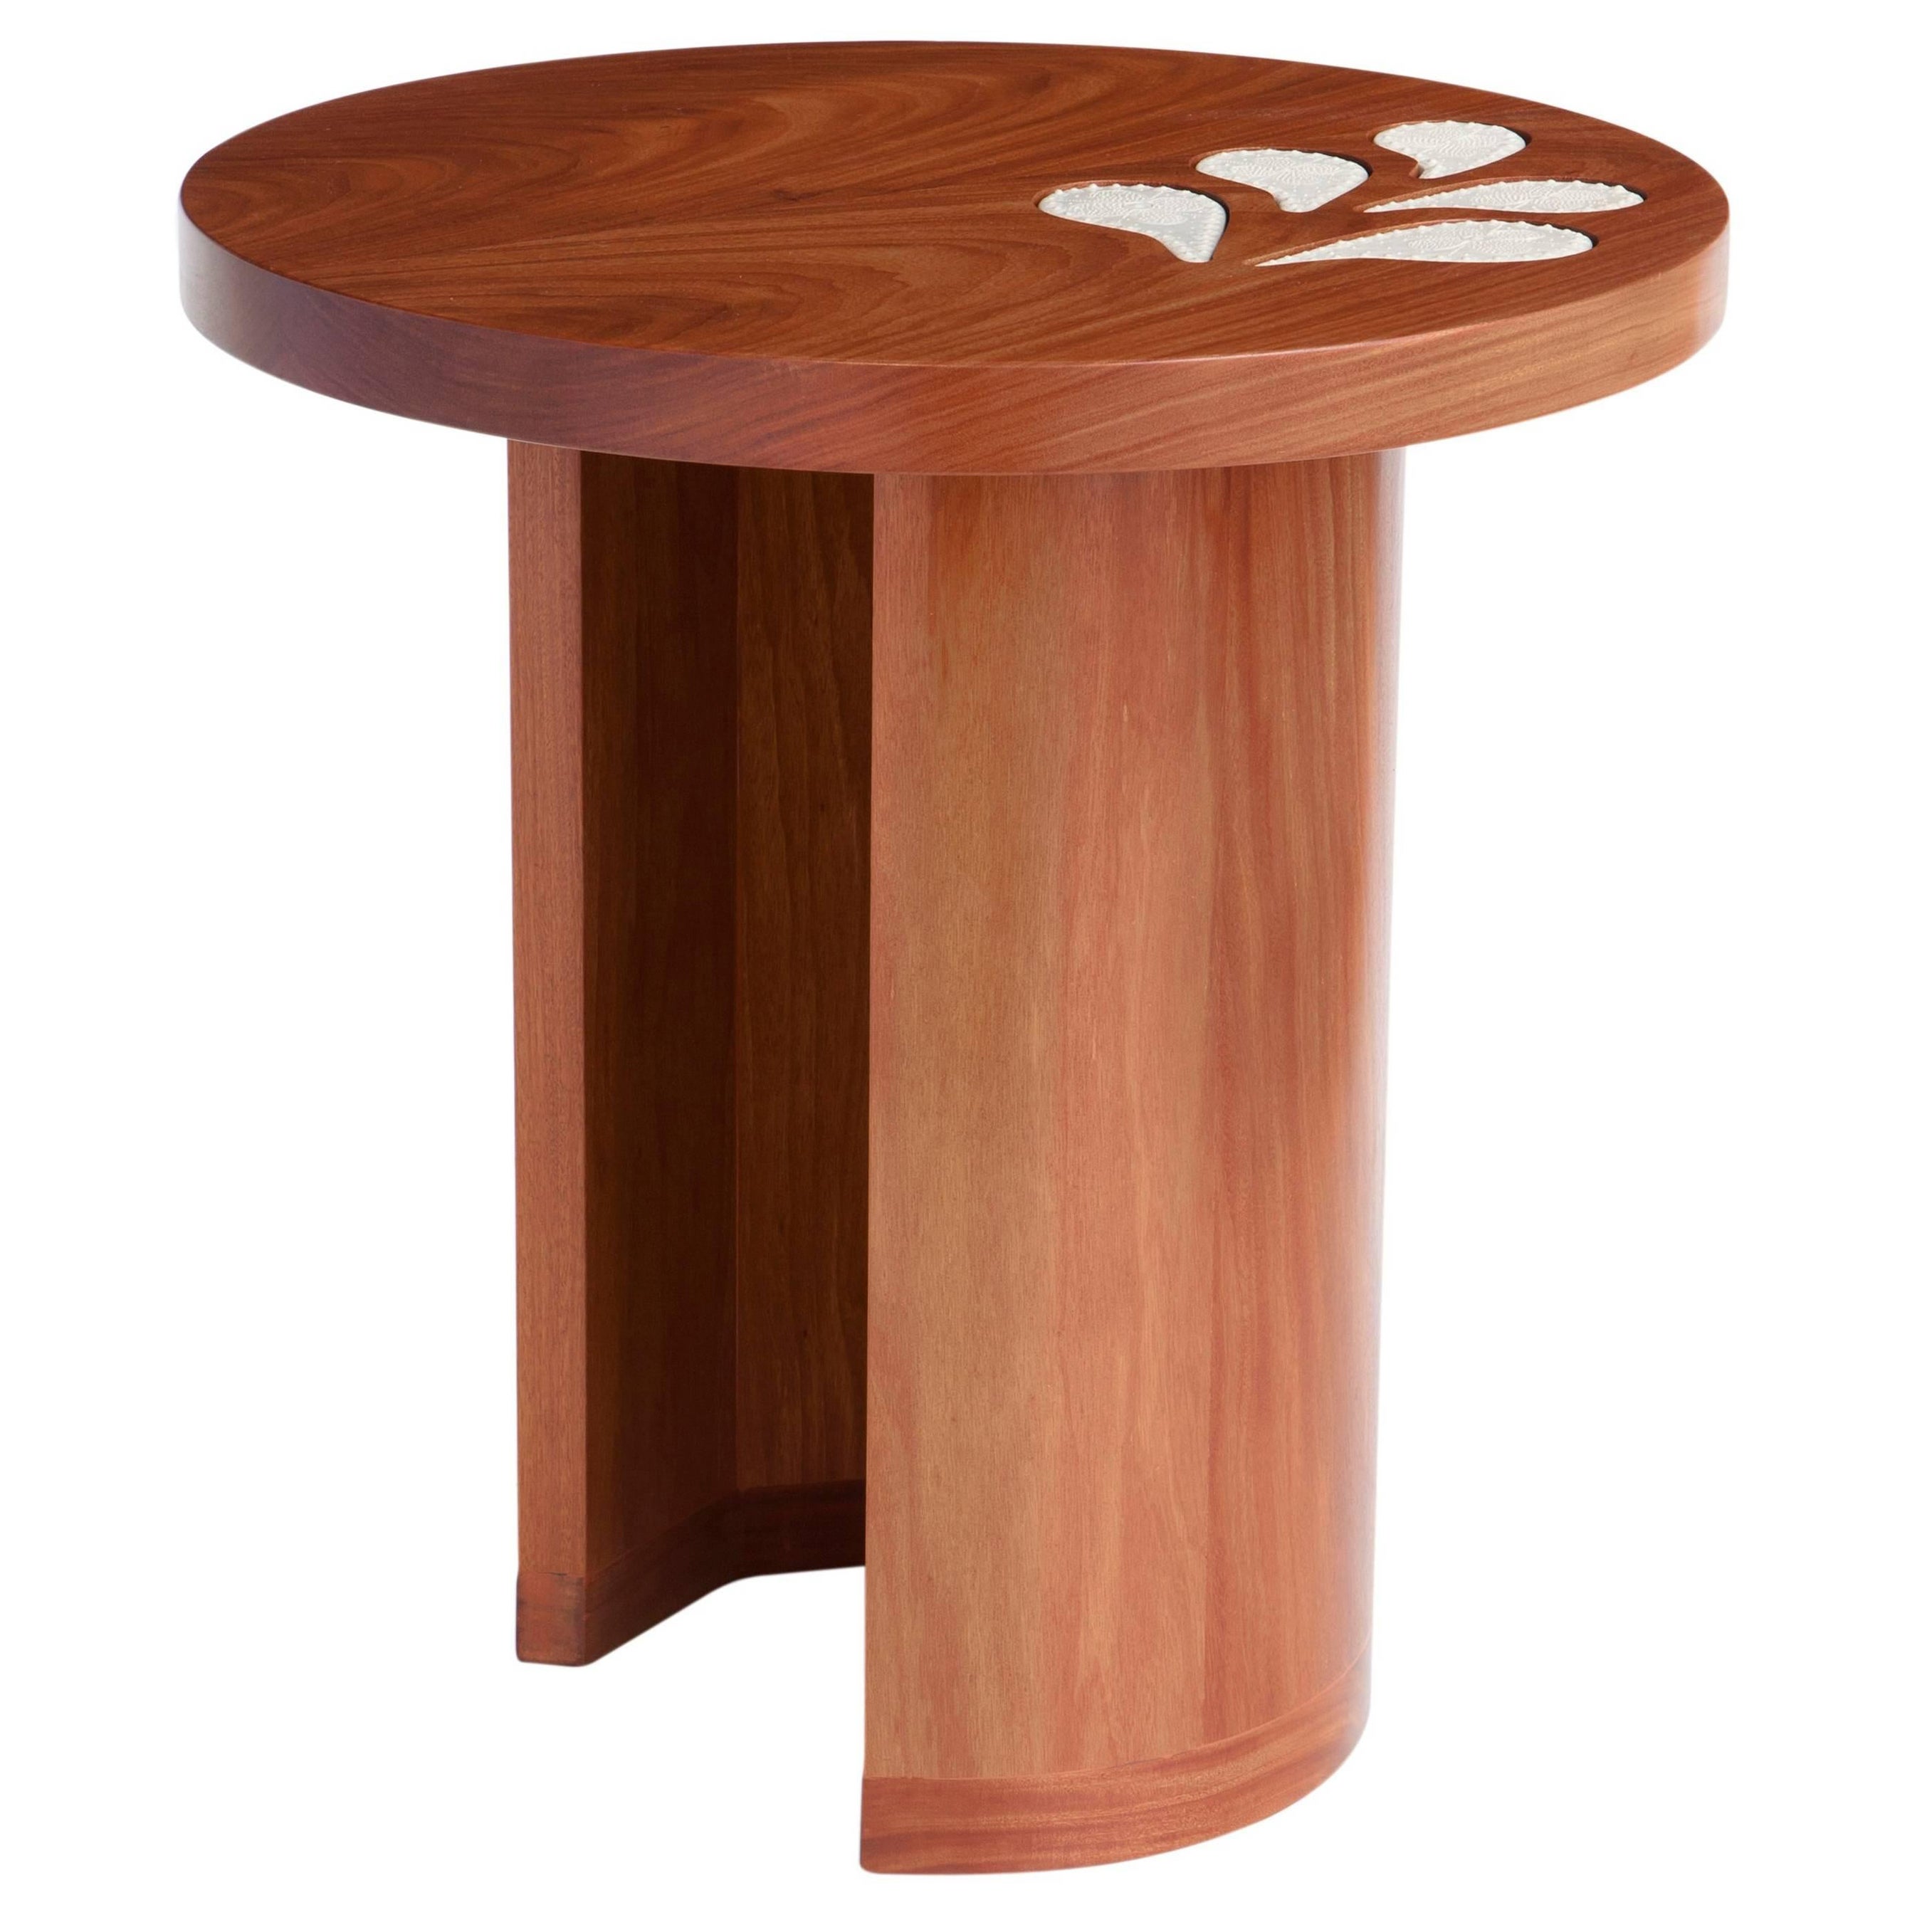 Encontros Side Table: handmade in Brazil with traditional ceramic and solid wood